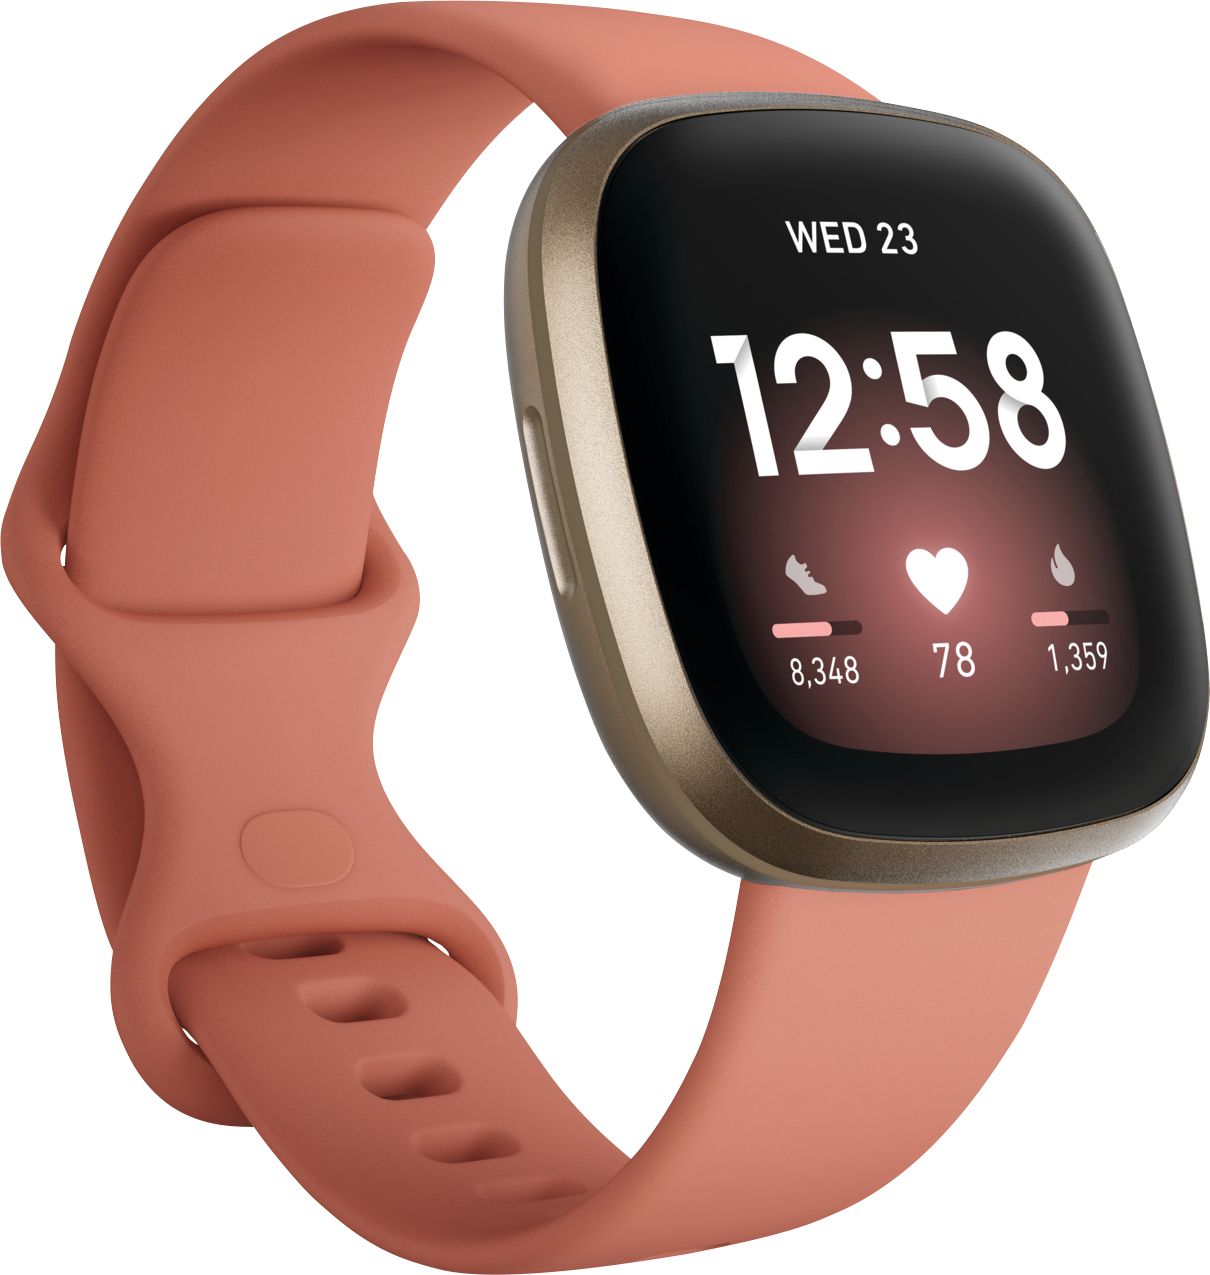 is there a new fitbit versa coming out in 2020